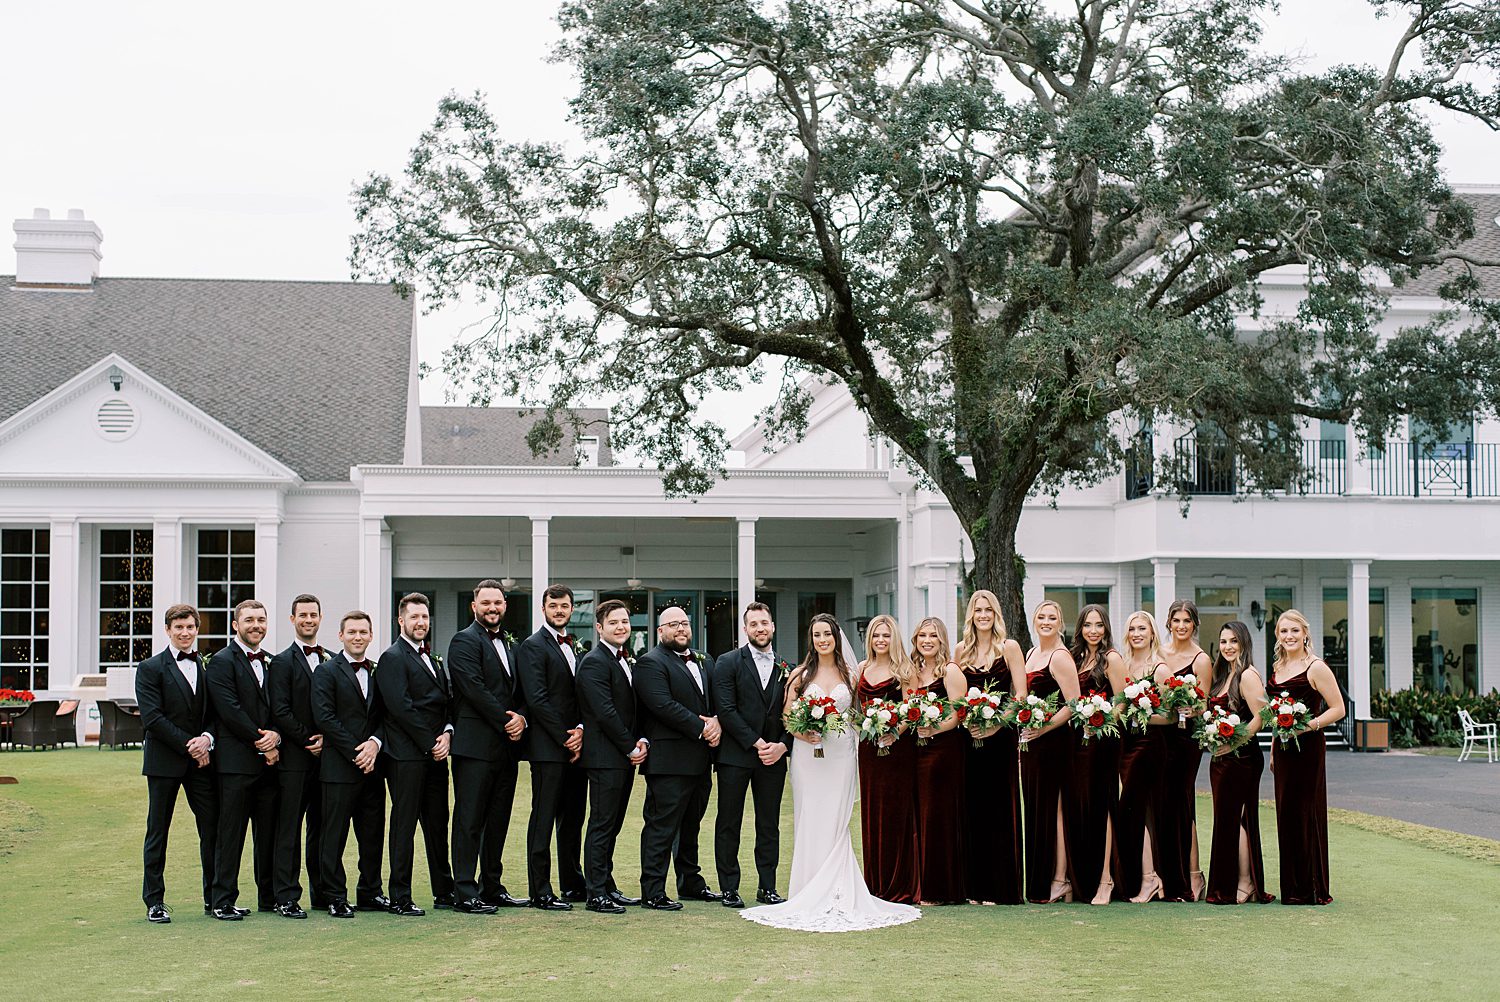 bride and groom stand with wedding party in red velvet gowns and black tuxes outside Palma Ceia Country Club